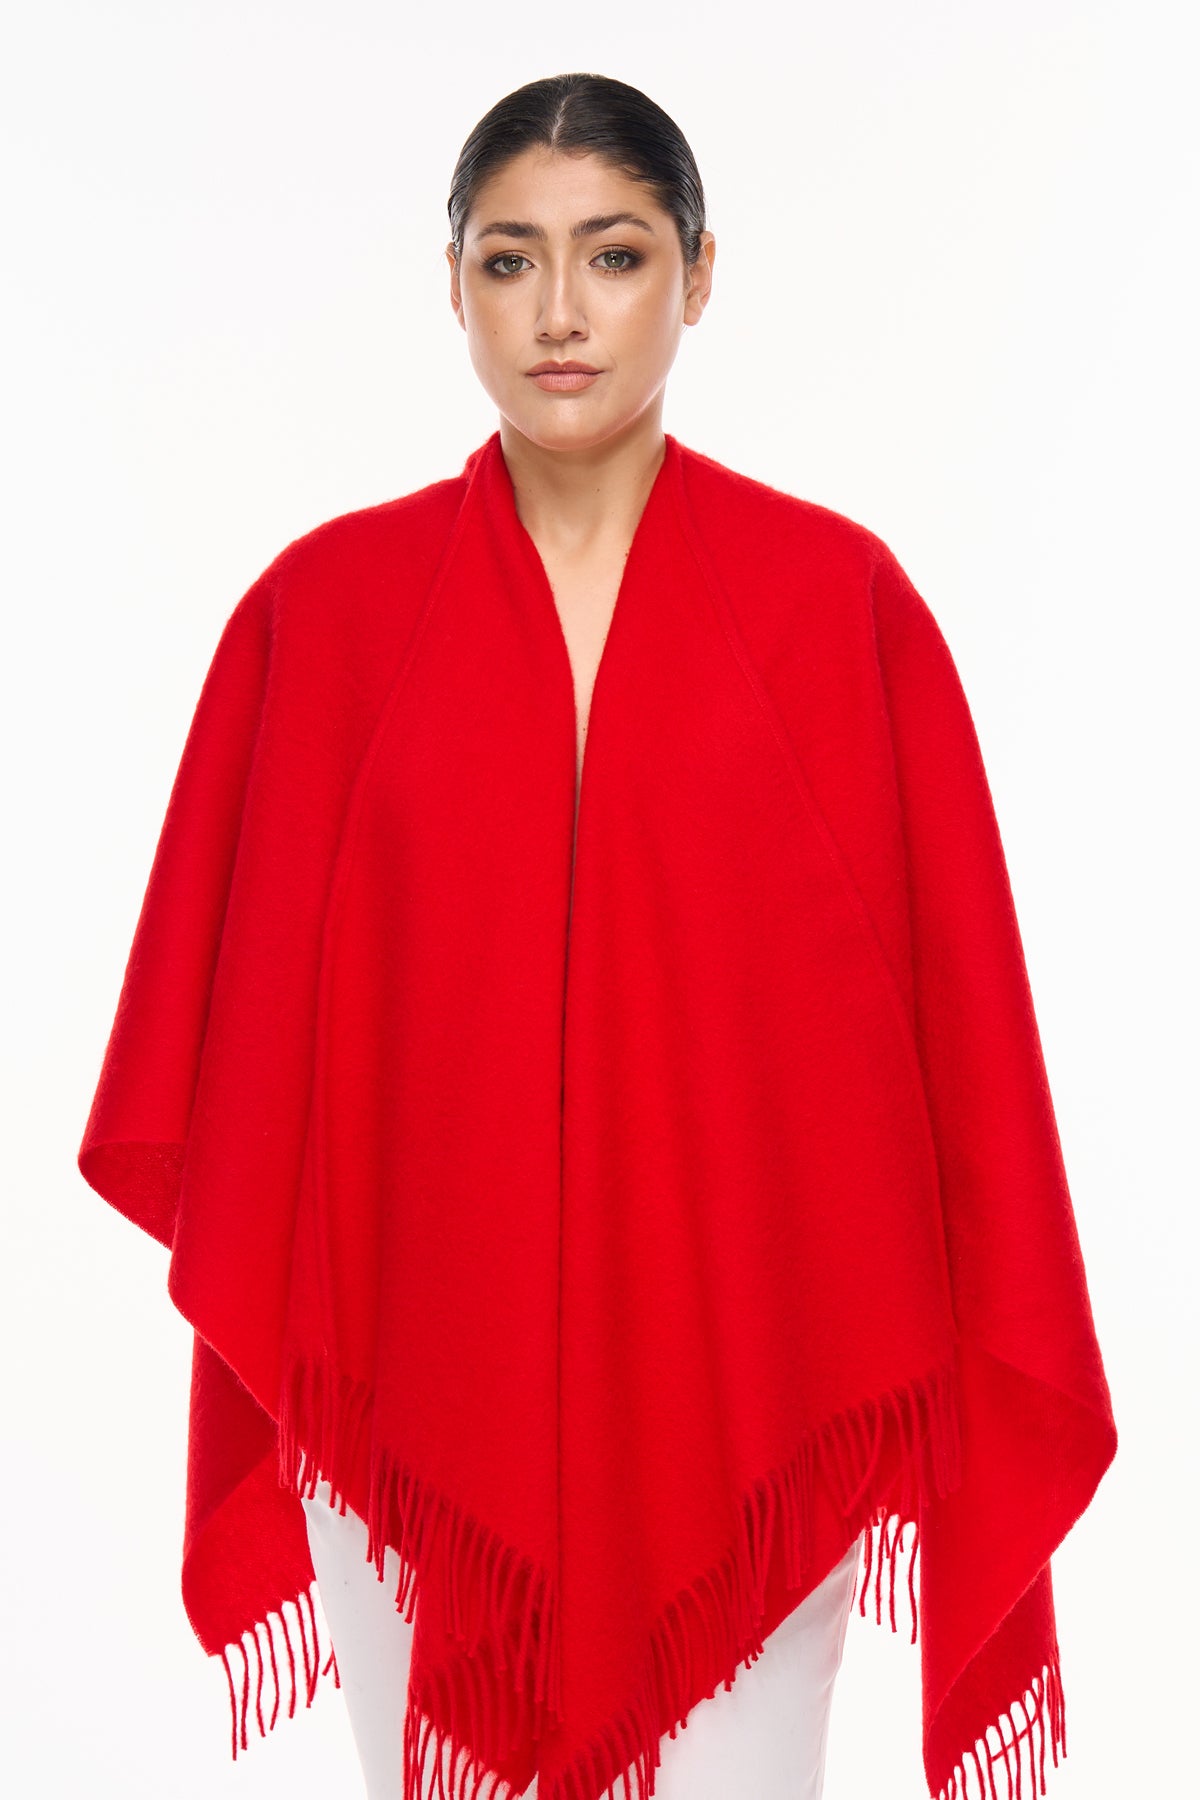 Plain Cape Red Poncho 100% Pure Lambswool